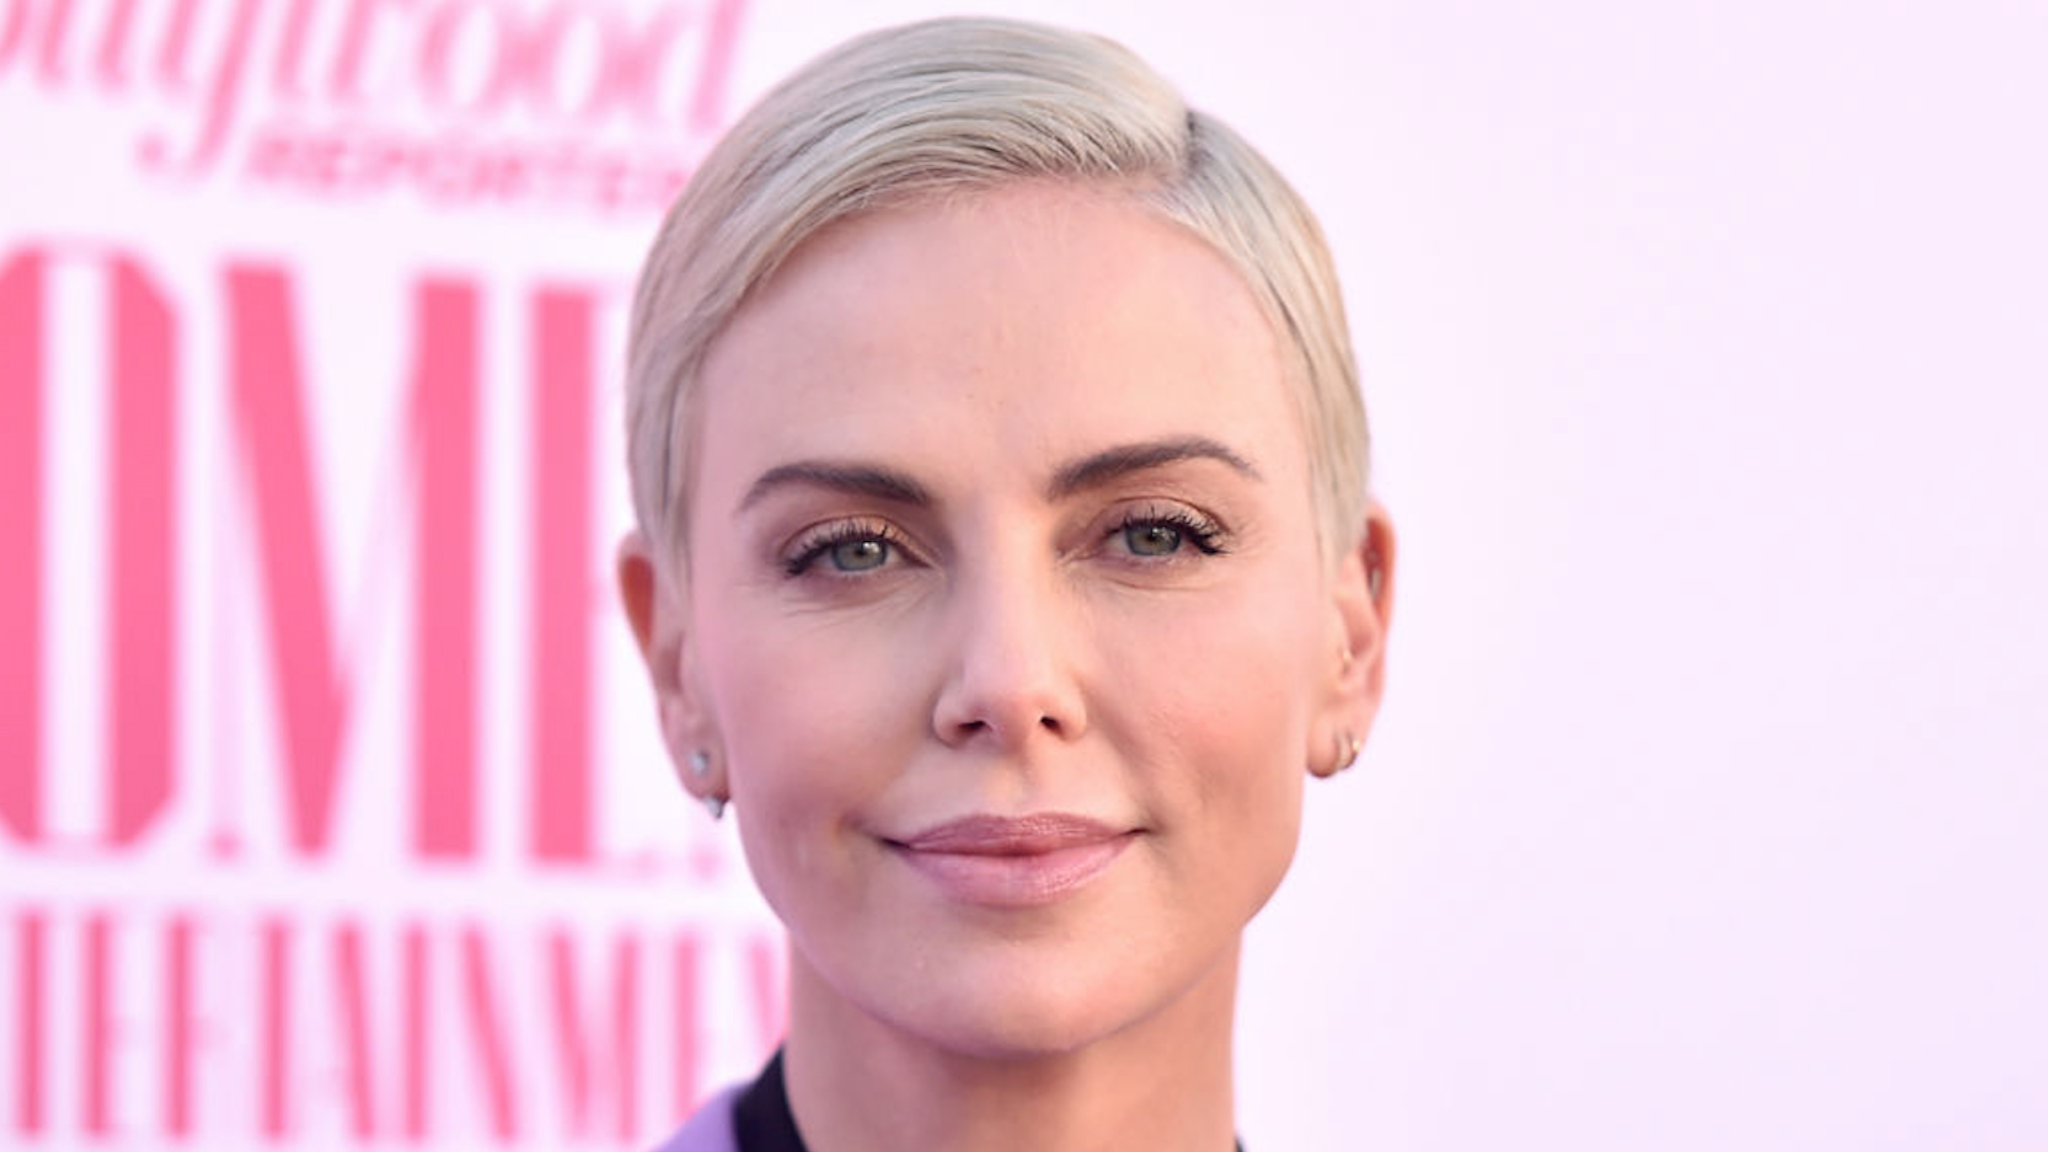 Actor-producer Charlize Theron attends The Hollywood Reporter's Power 100 Women in Entertainment at Milk Studios on December 11, 2019 in Hollywood, California. (